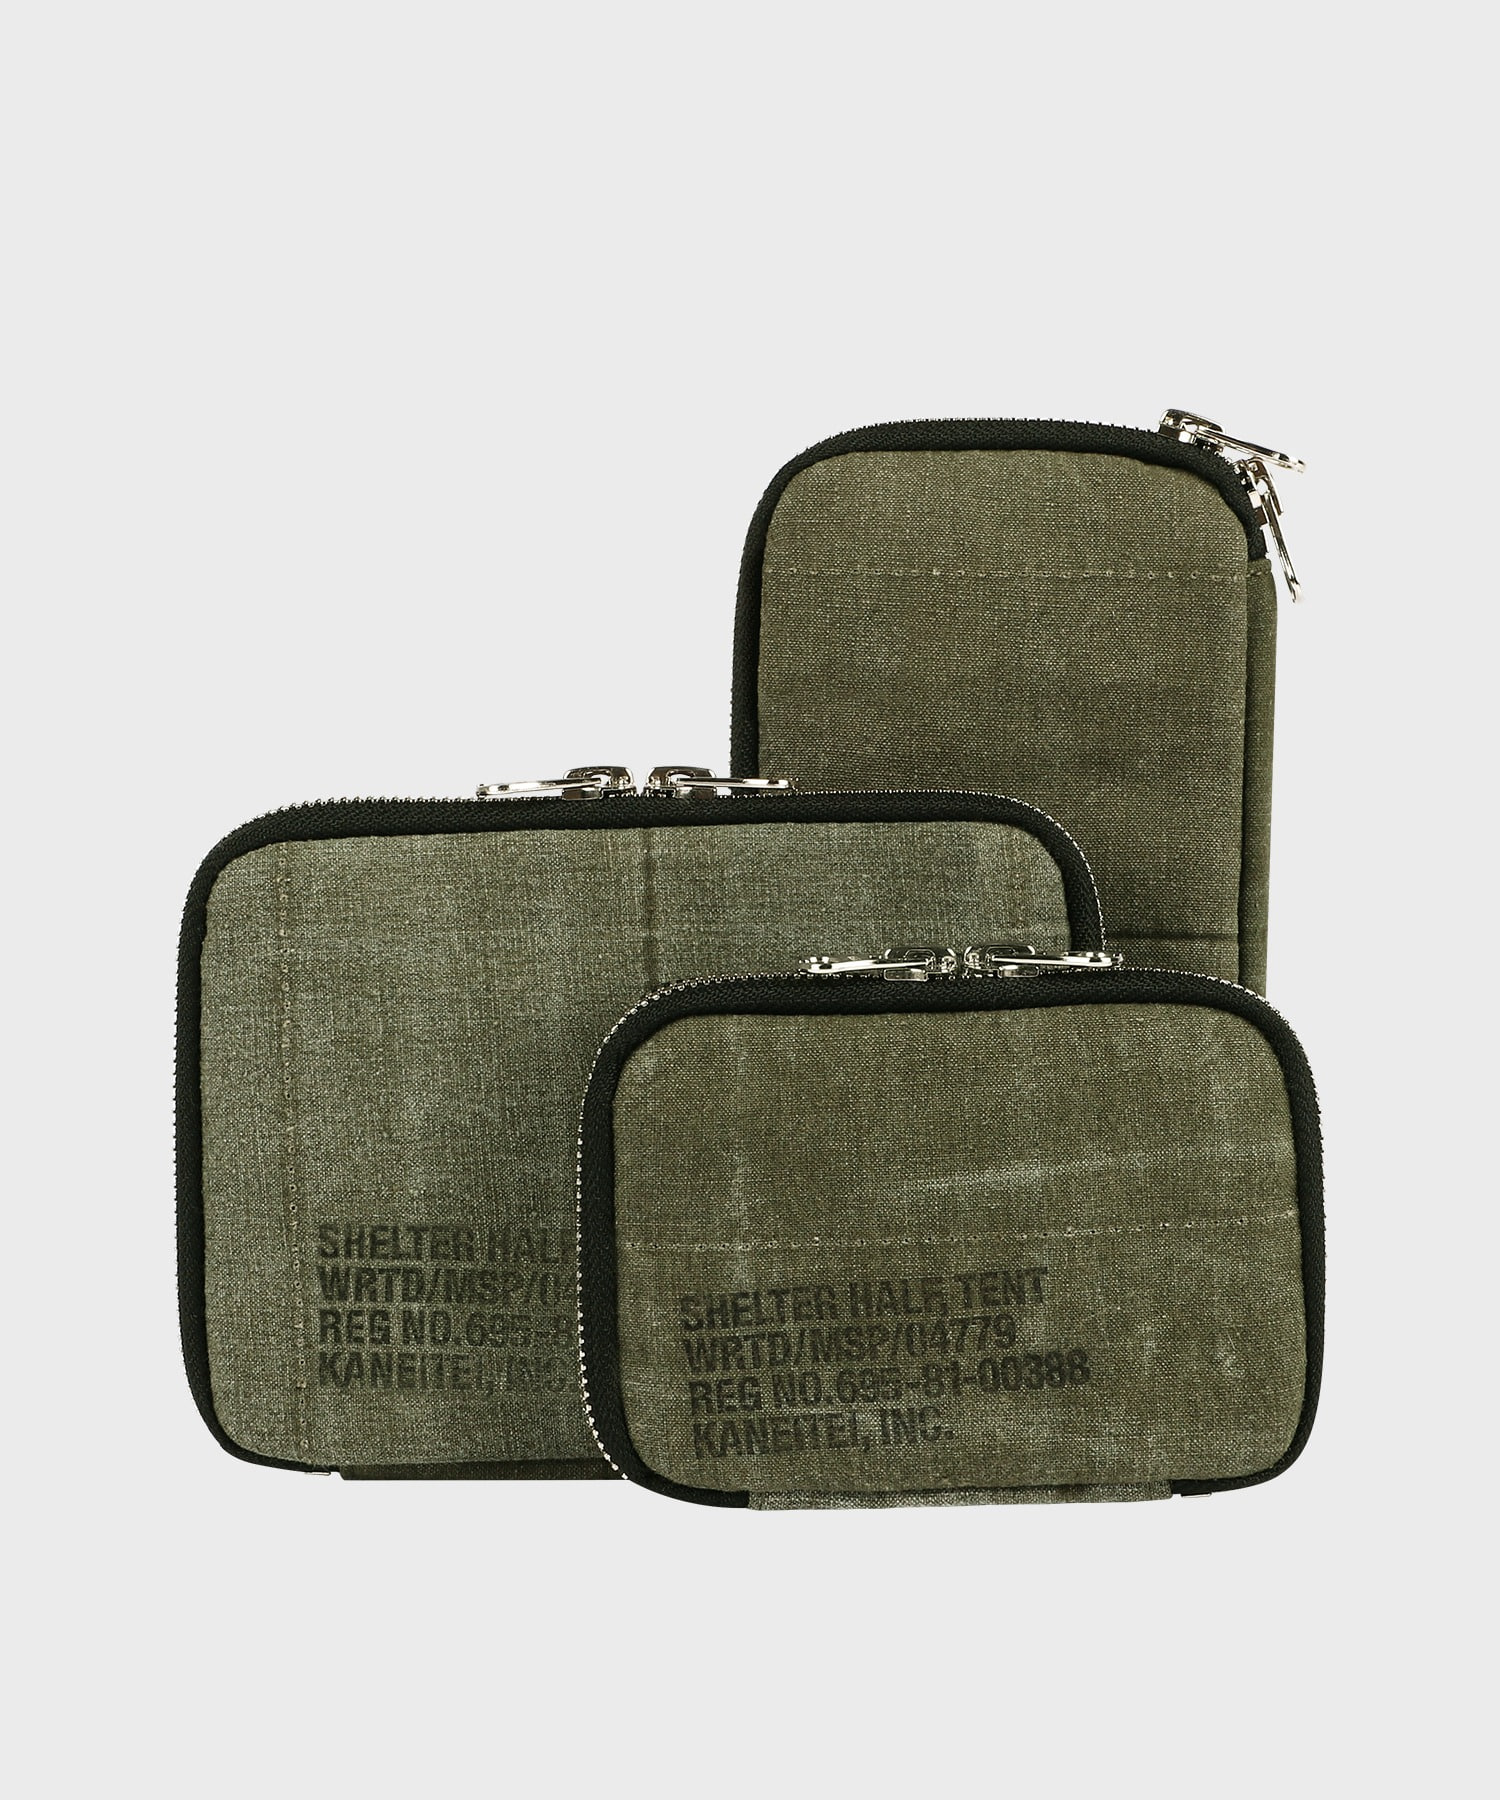 SEI ZIP WALLET (OLIVE DRAB) / UPCYCLED